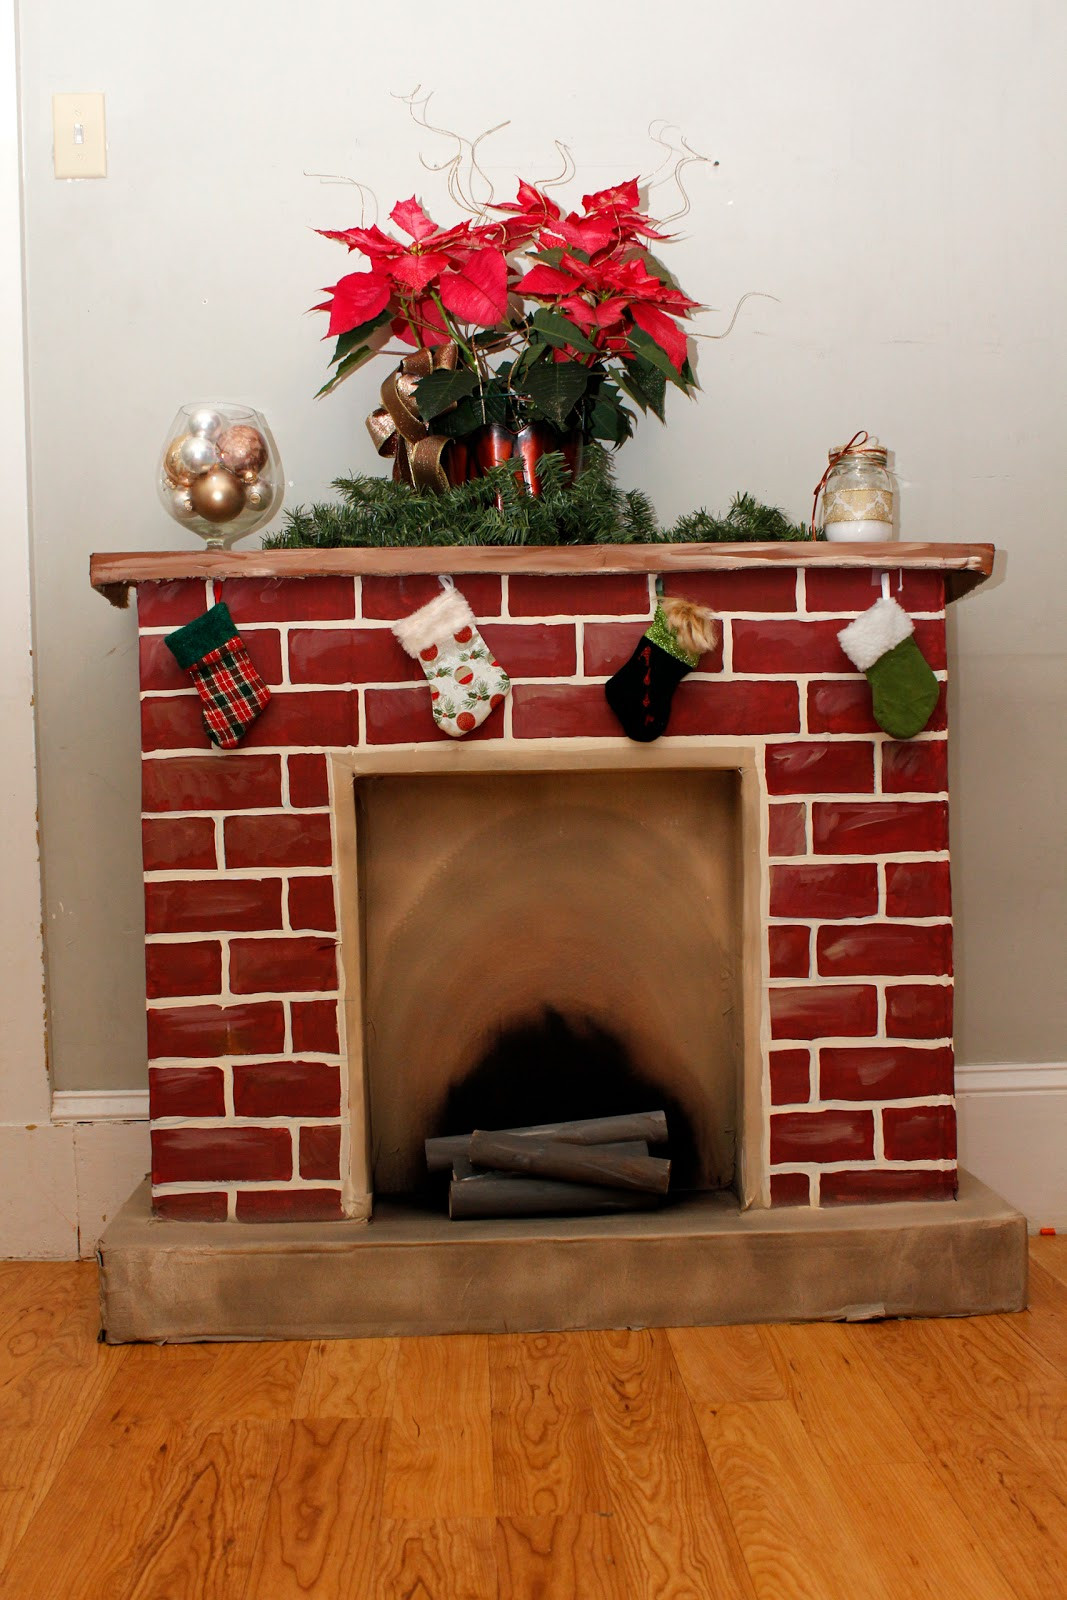 DIY Christmas Fireplace
 365 Days to Simplicity Chestnuts roasting on an cardboard